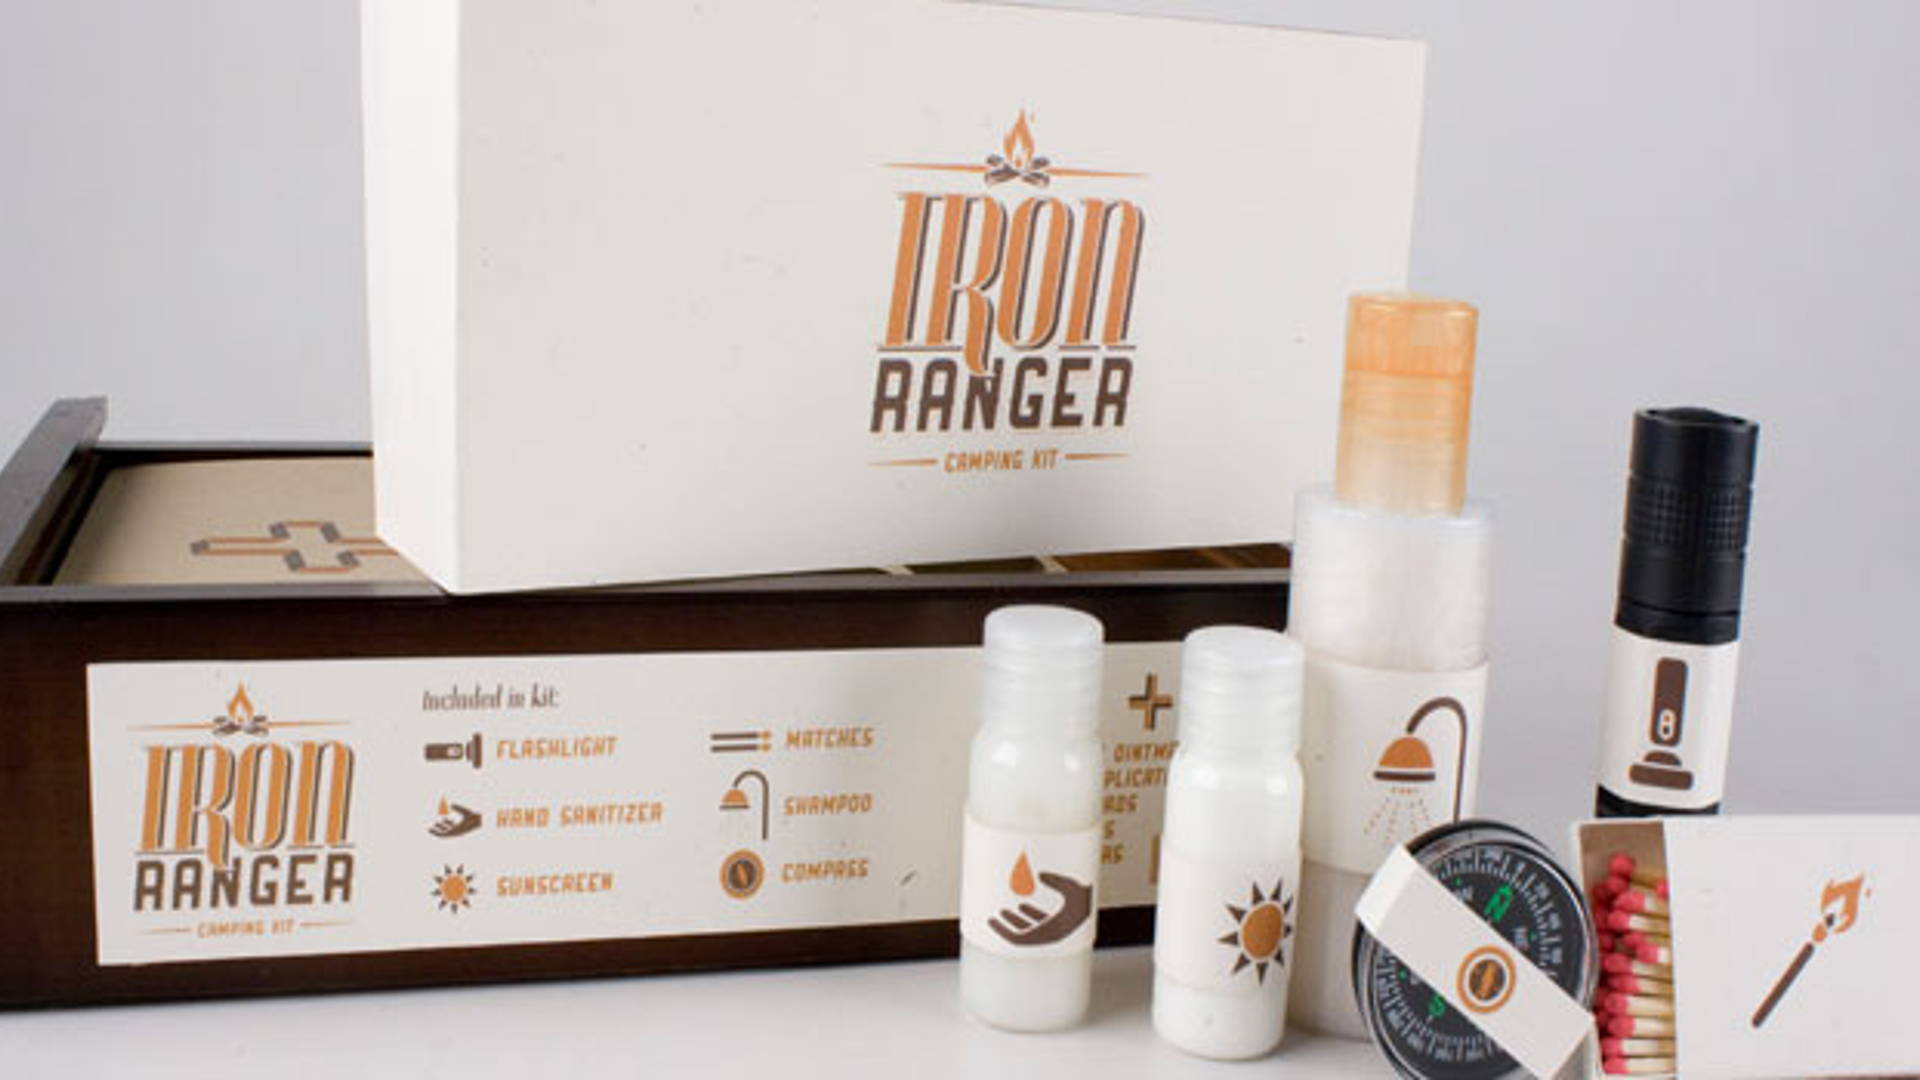 Featured image for Student Spotlight: Iron Ranger Camping Kit